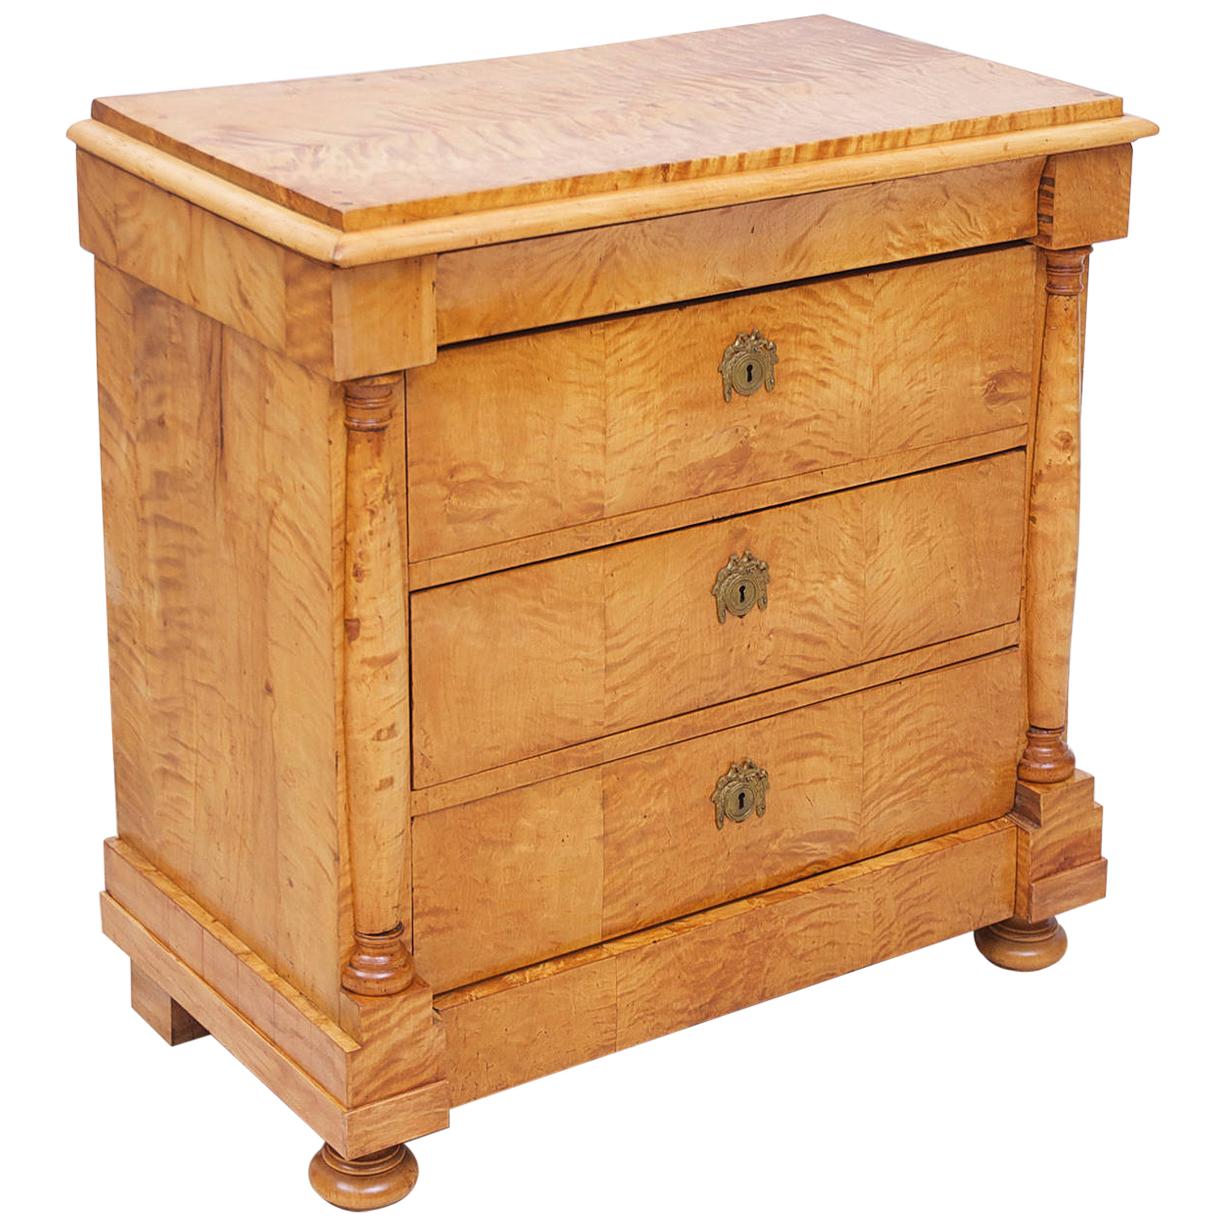 Swedish Biedermeier / Empire Chest of Drawers in Quilted Birch, circa 1820